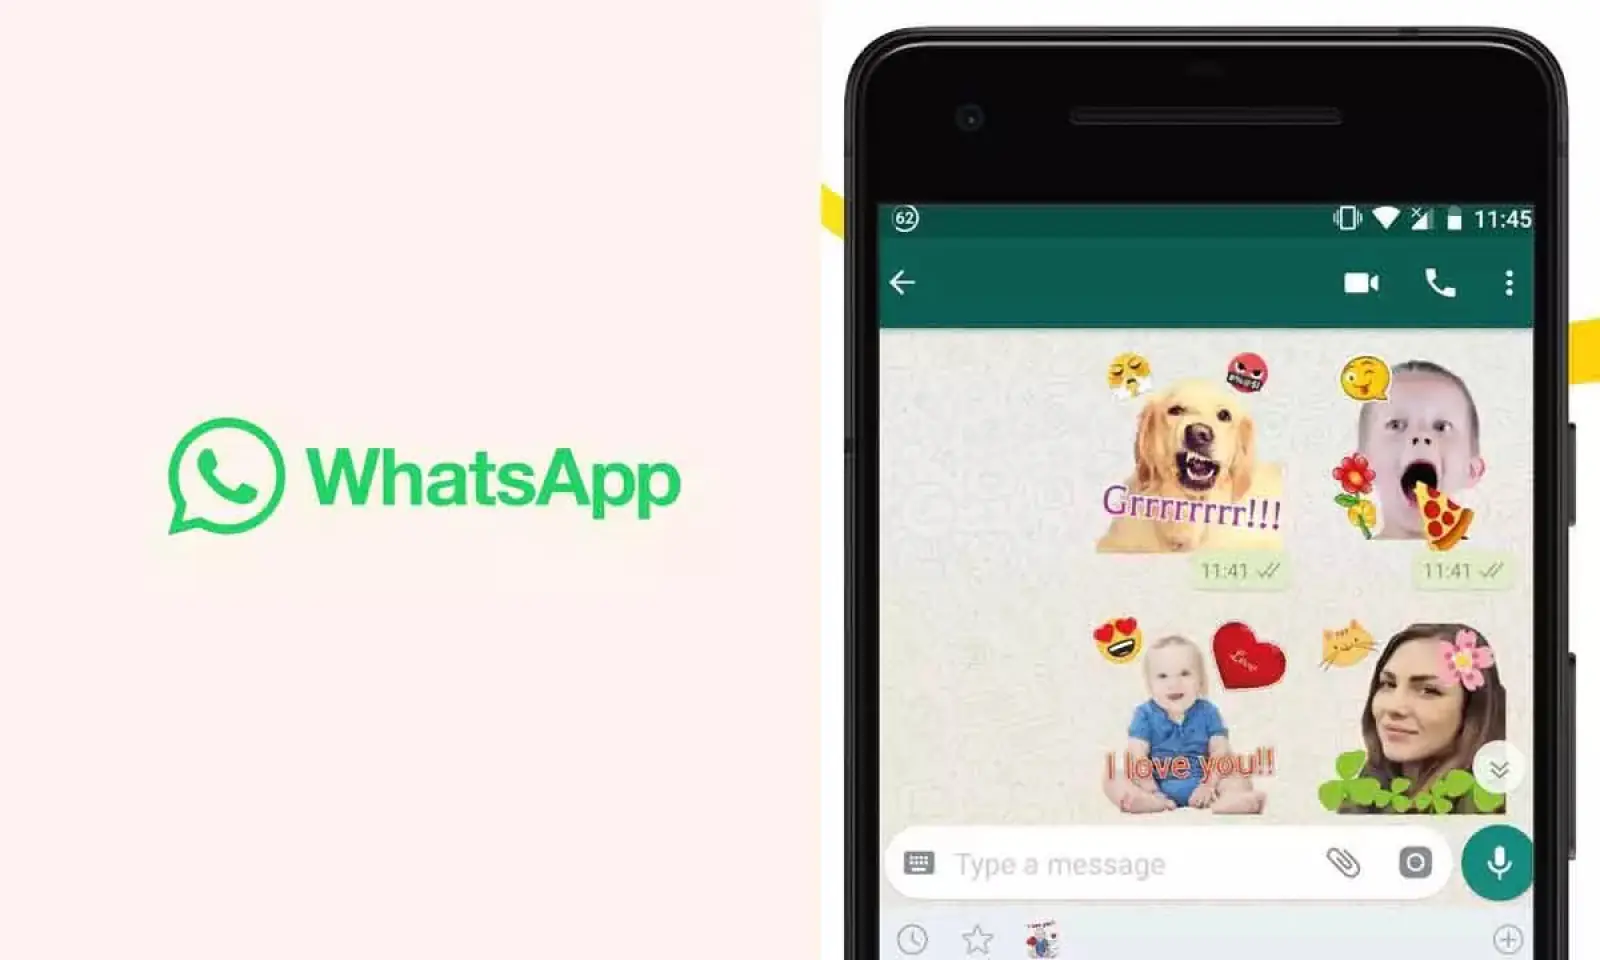 Update: New feature for WhatsApp will let you design amazing stickers on your own